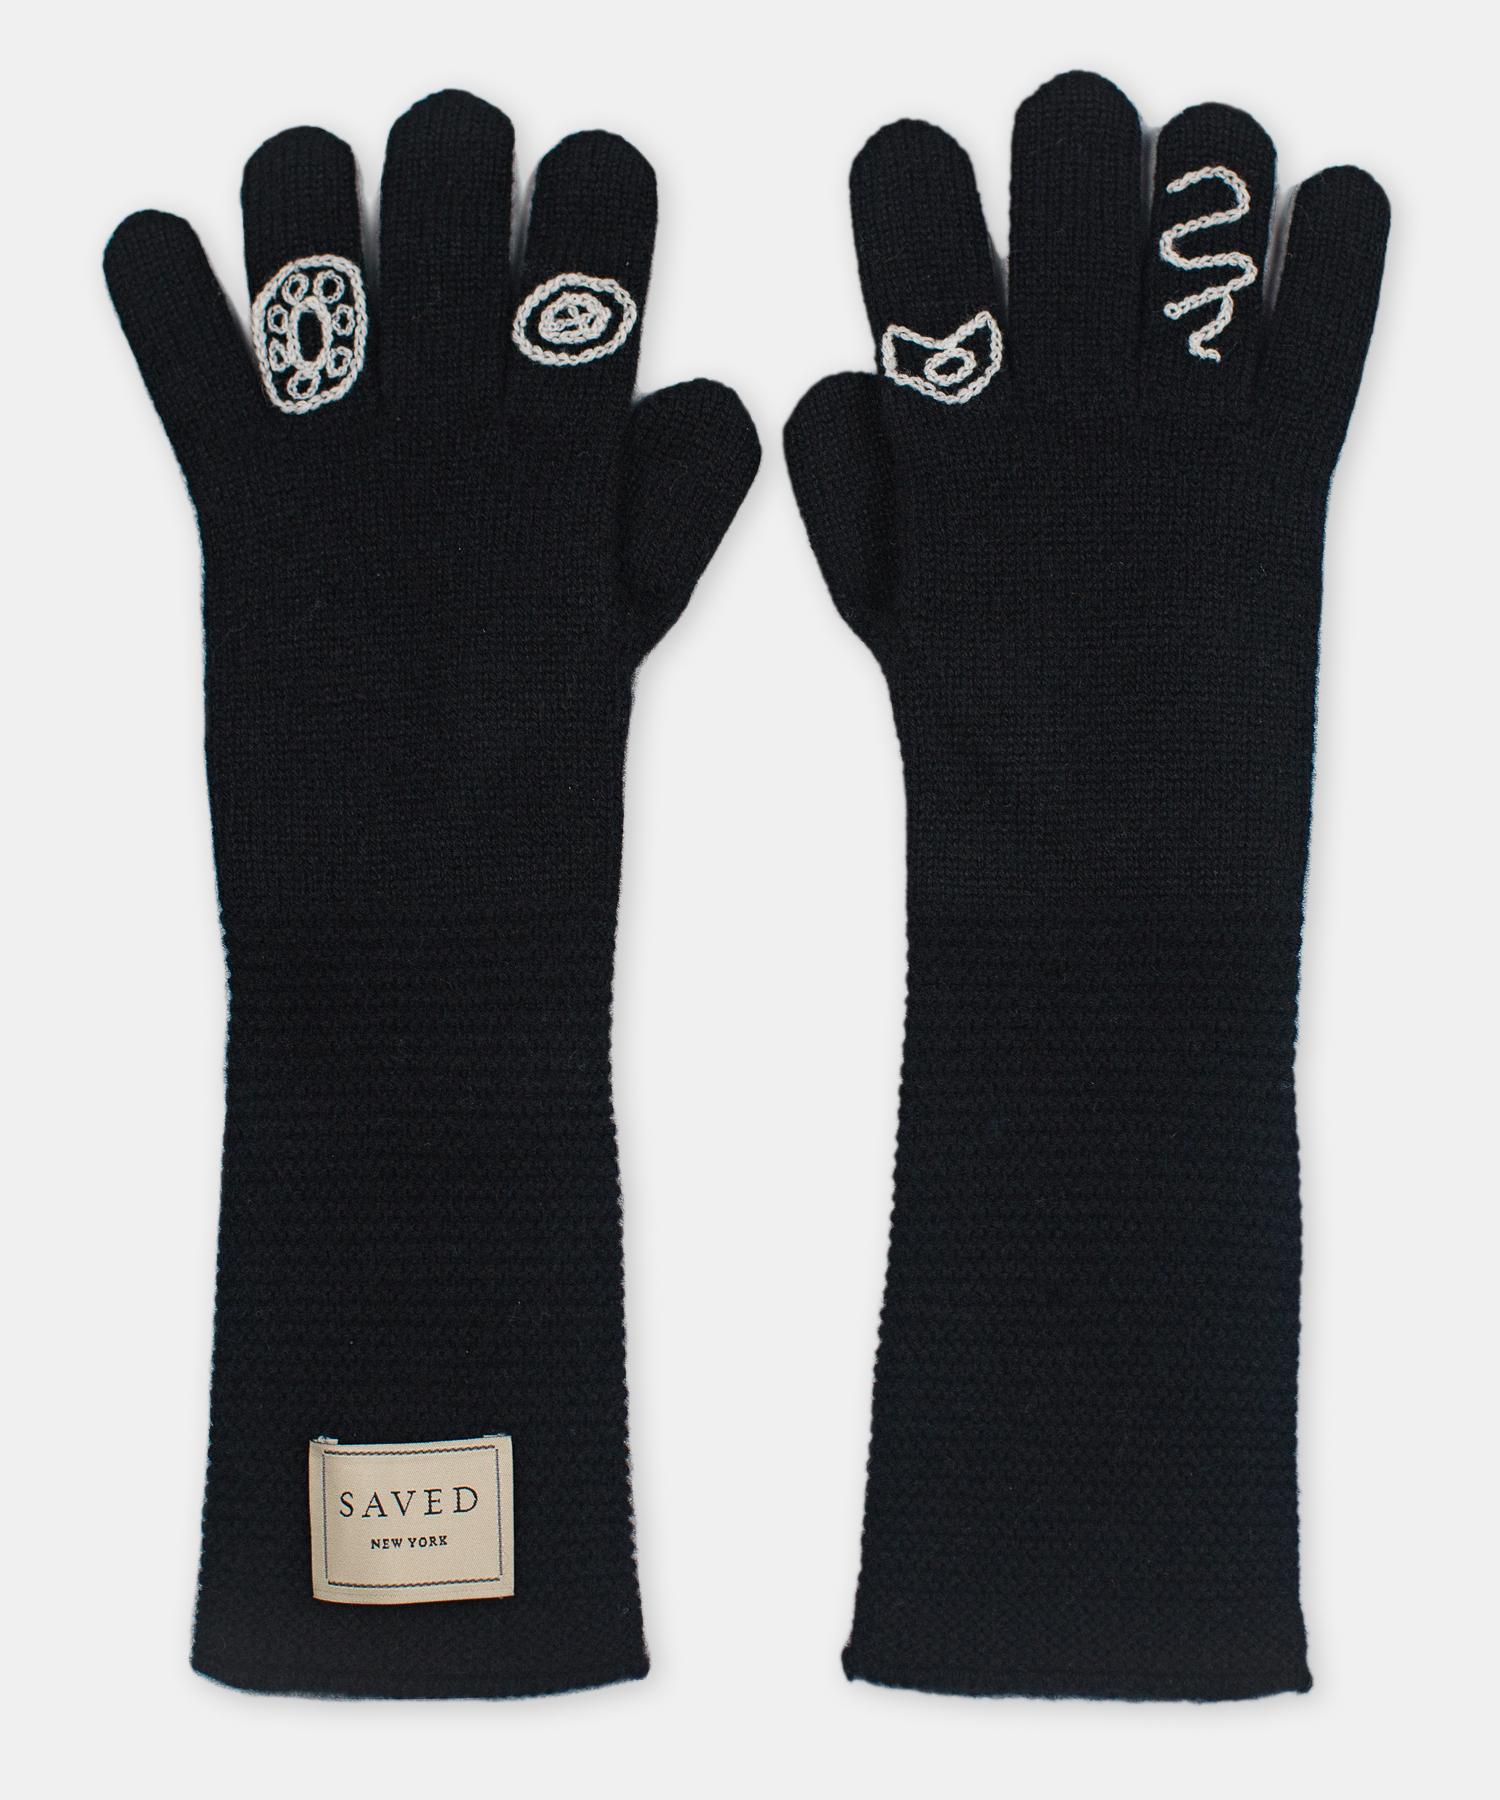 Black opera gloves by Saved, New York

Long, elegant length with hand embroidered details suitable for the theatre. One size. 